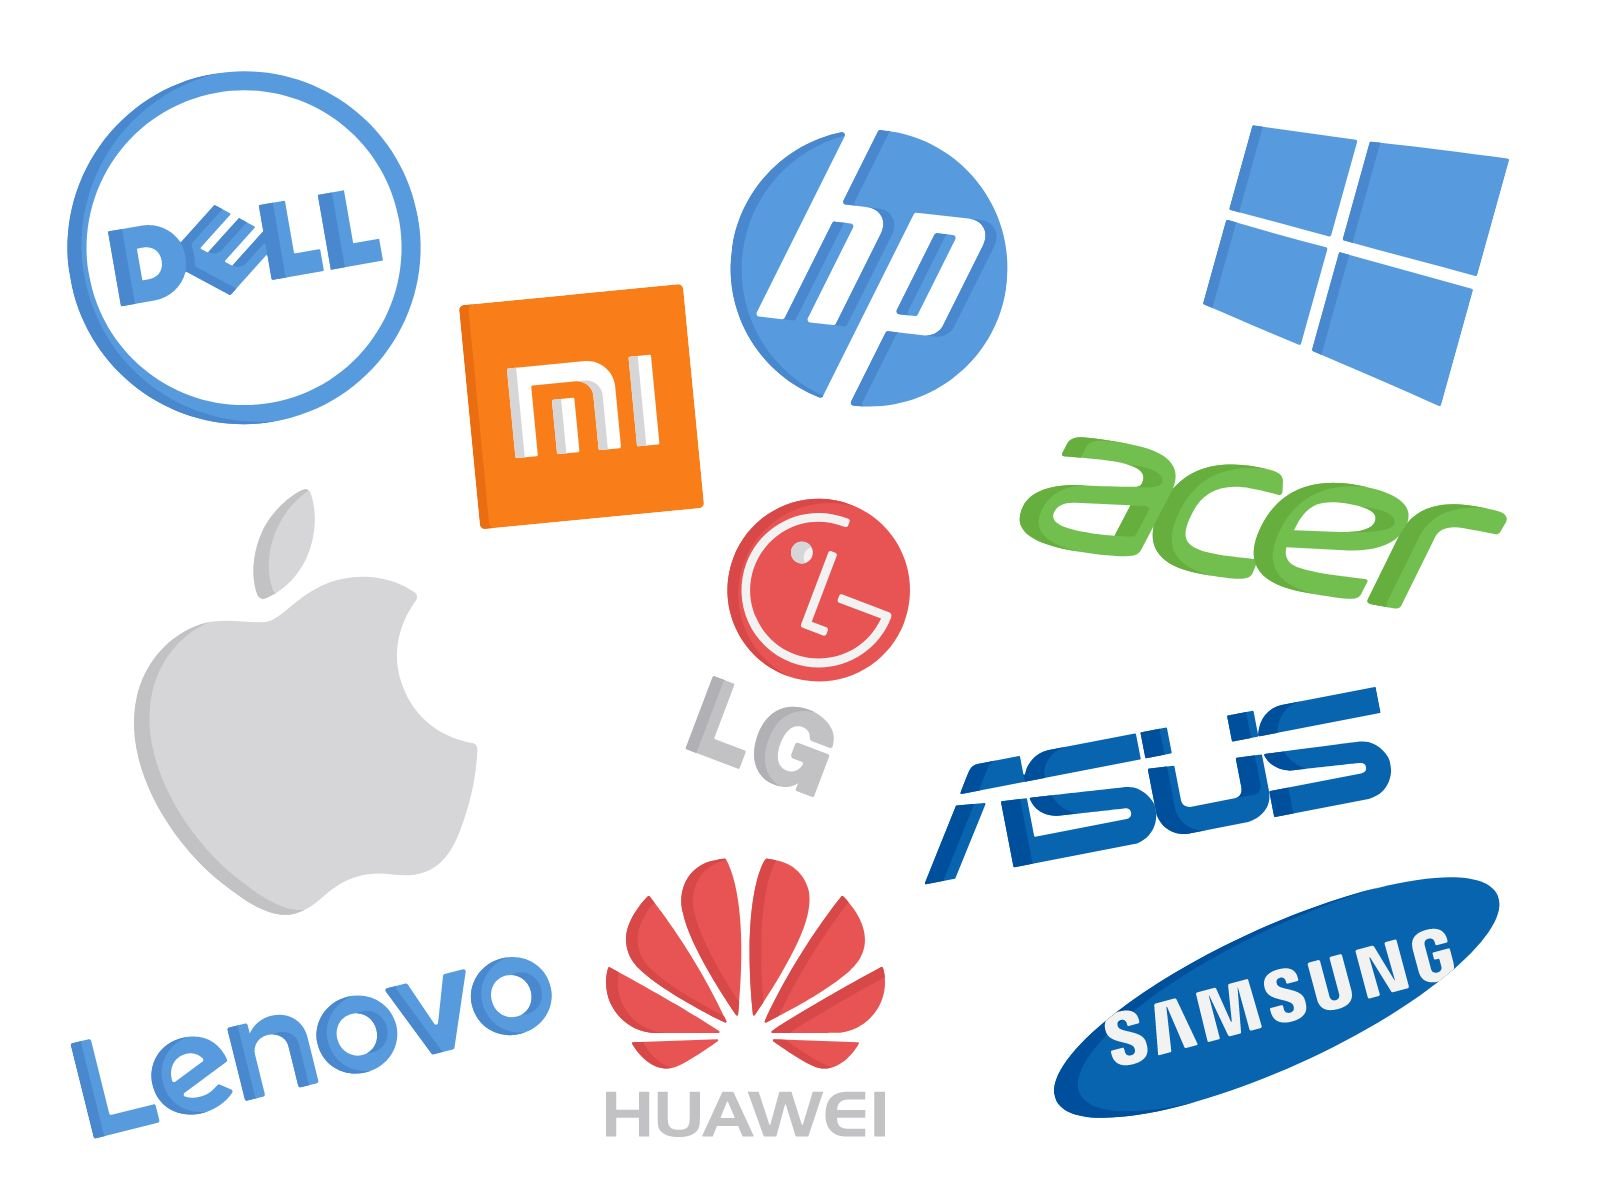 all famous laptop brands asus, hp, dell, macbook ect